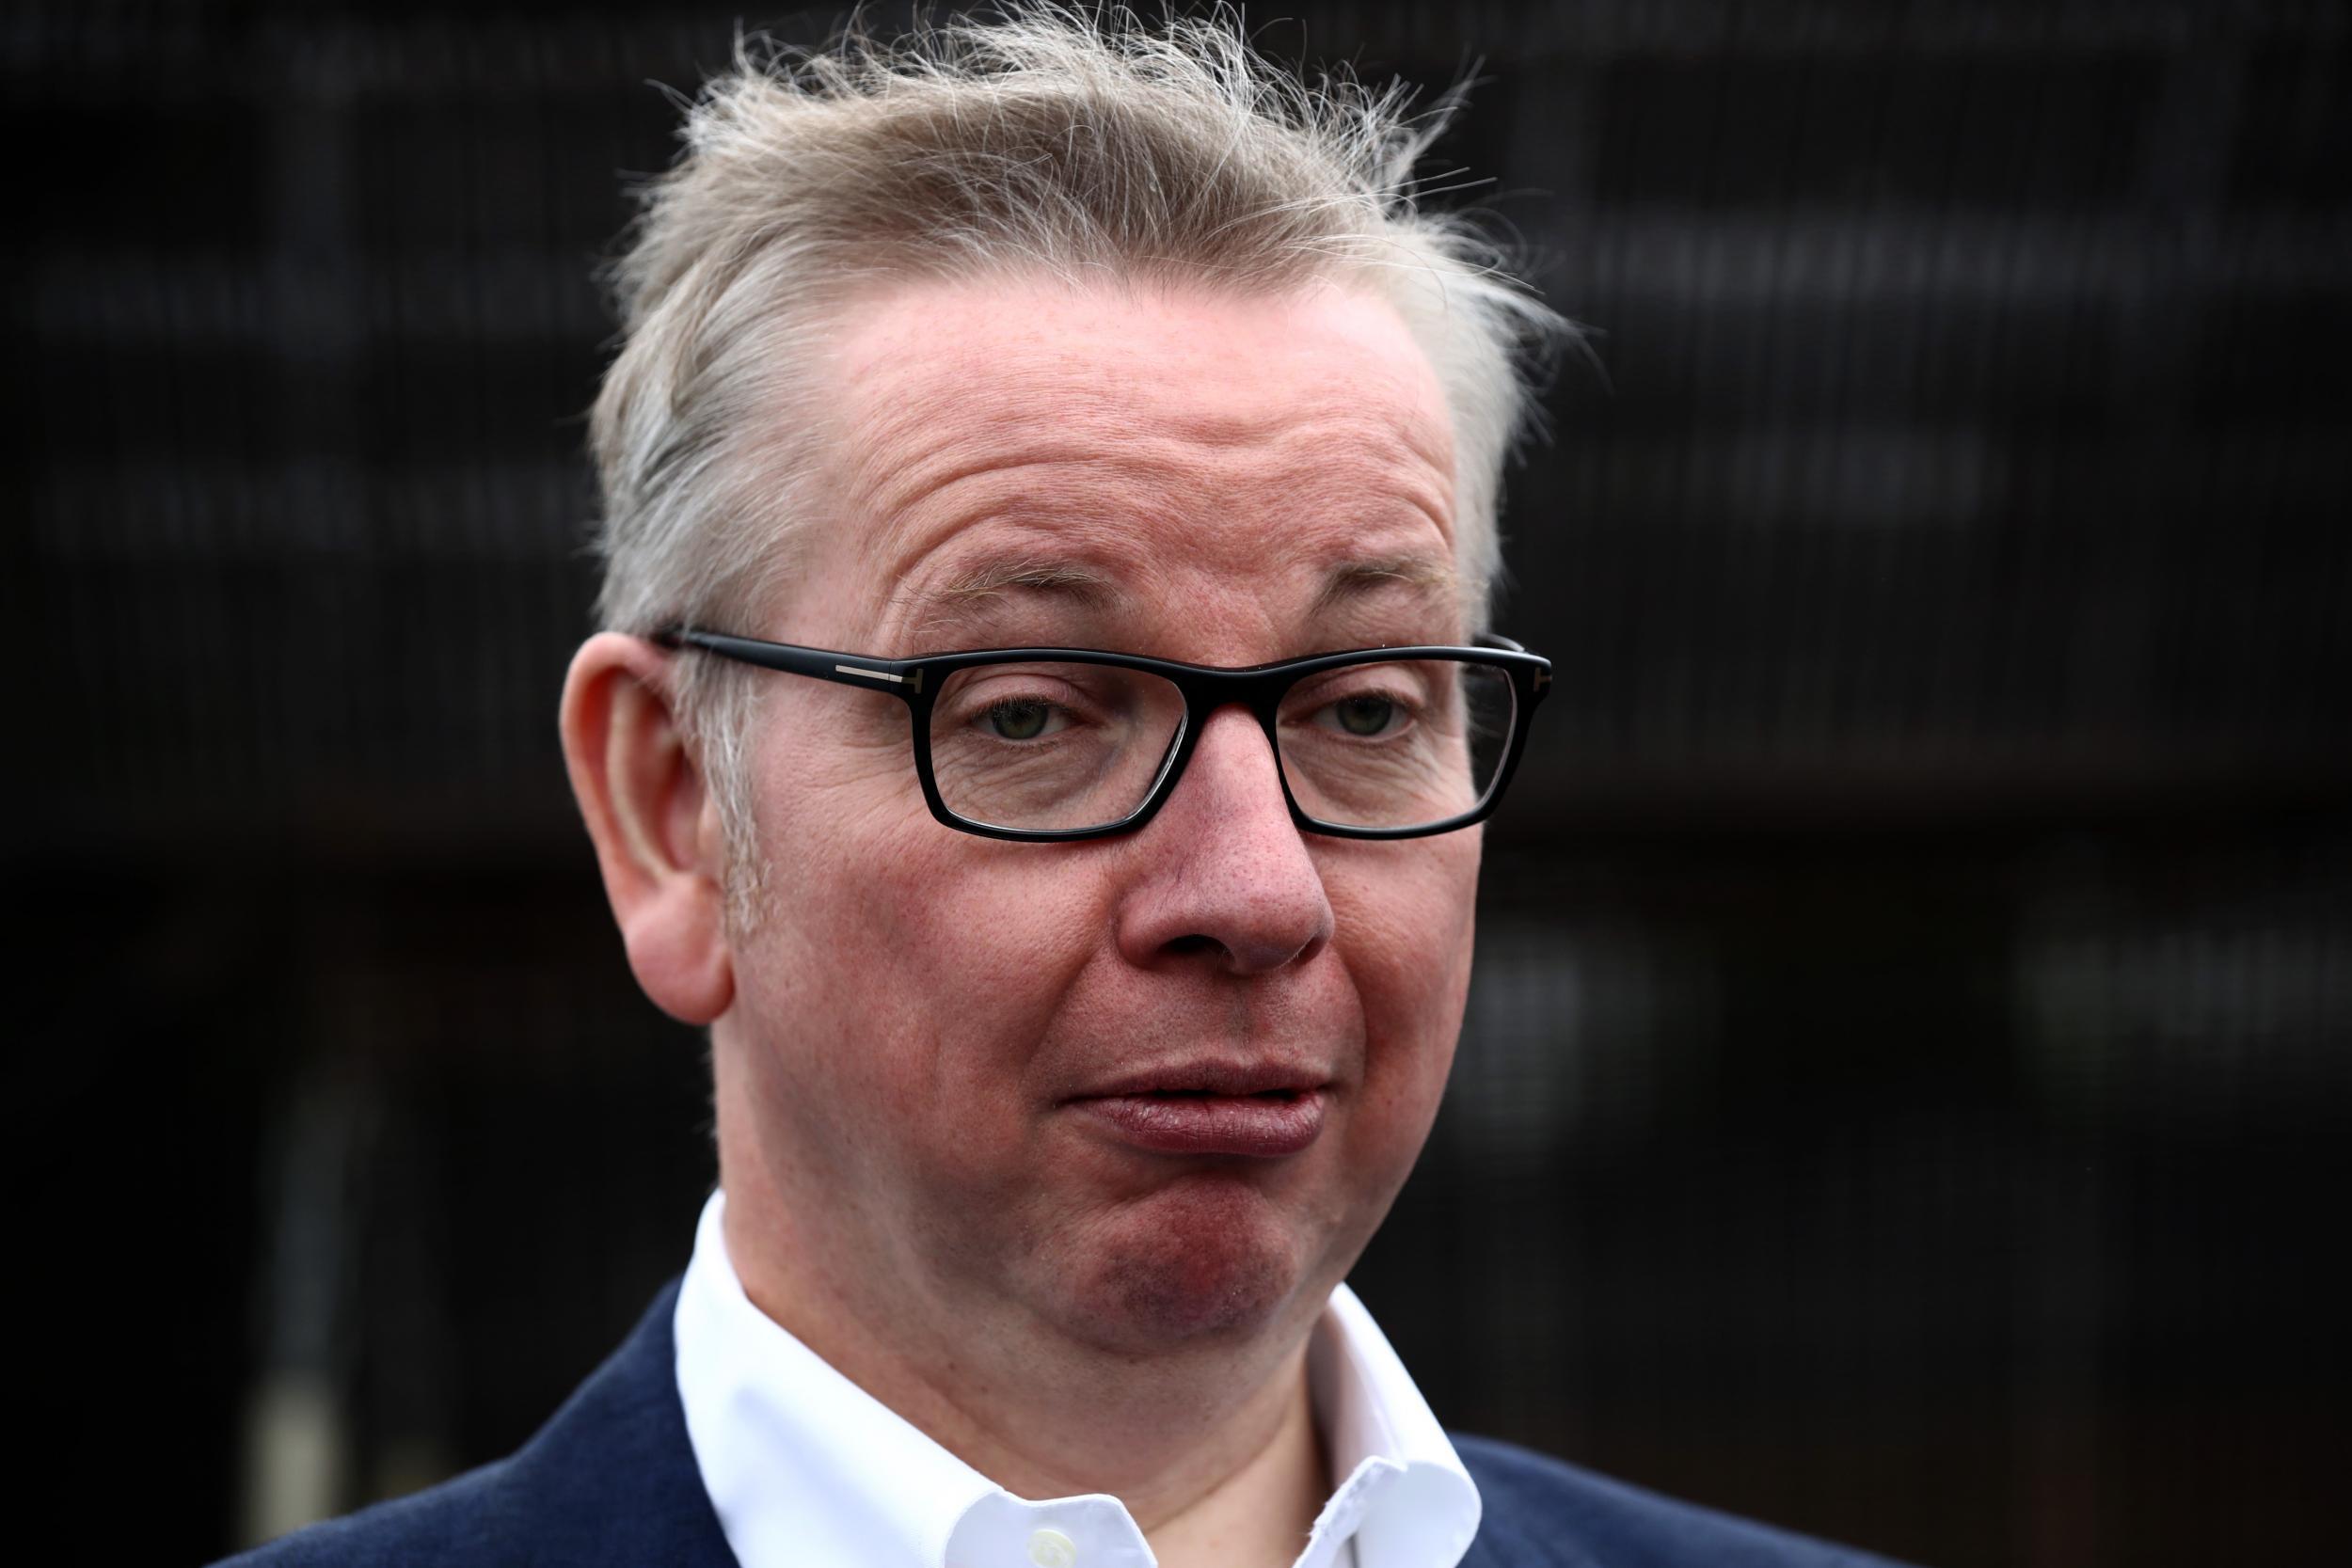 Mr Gove also accused Remain voters of throwing a 'tantrum'